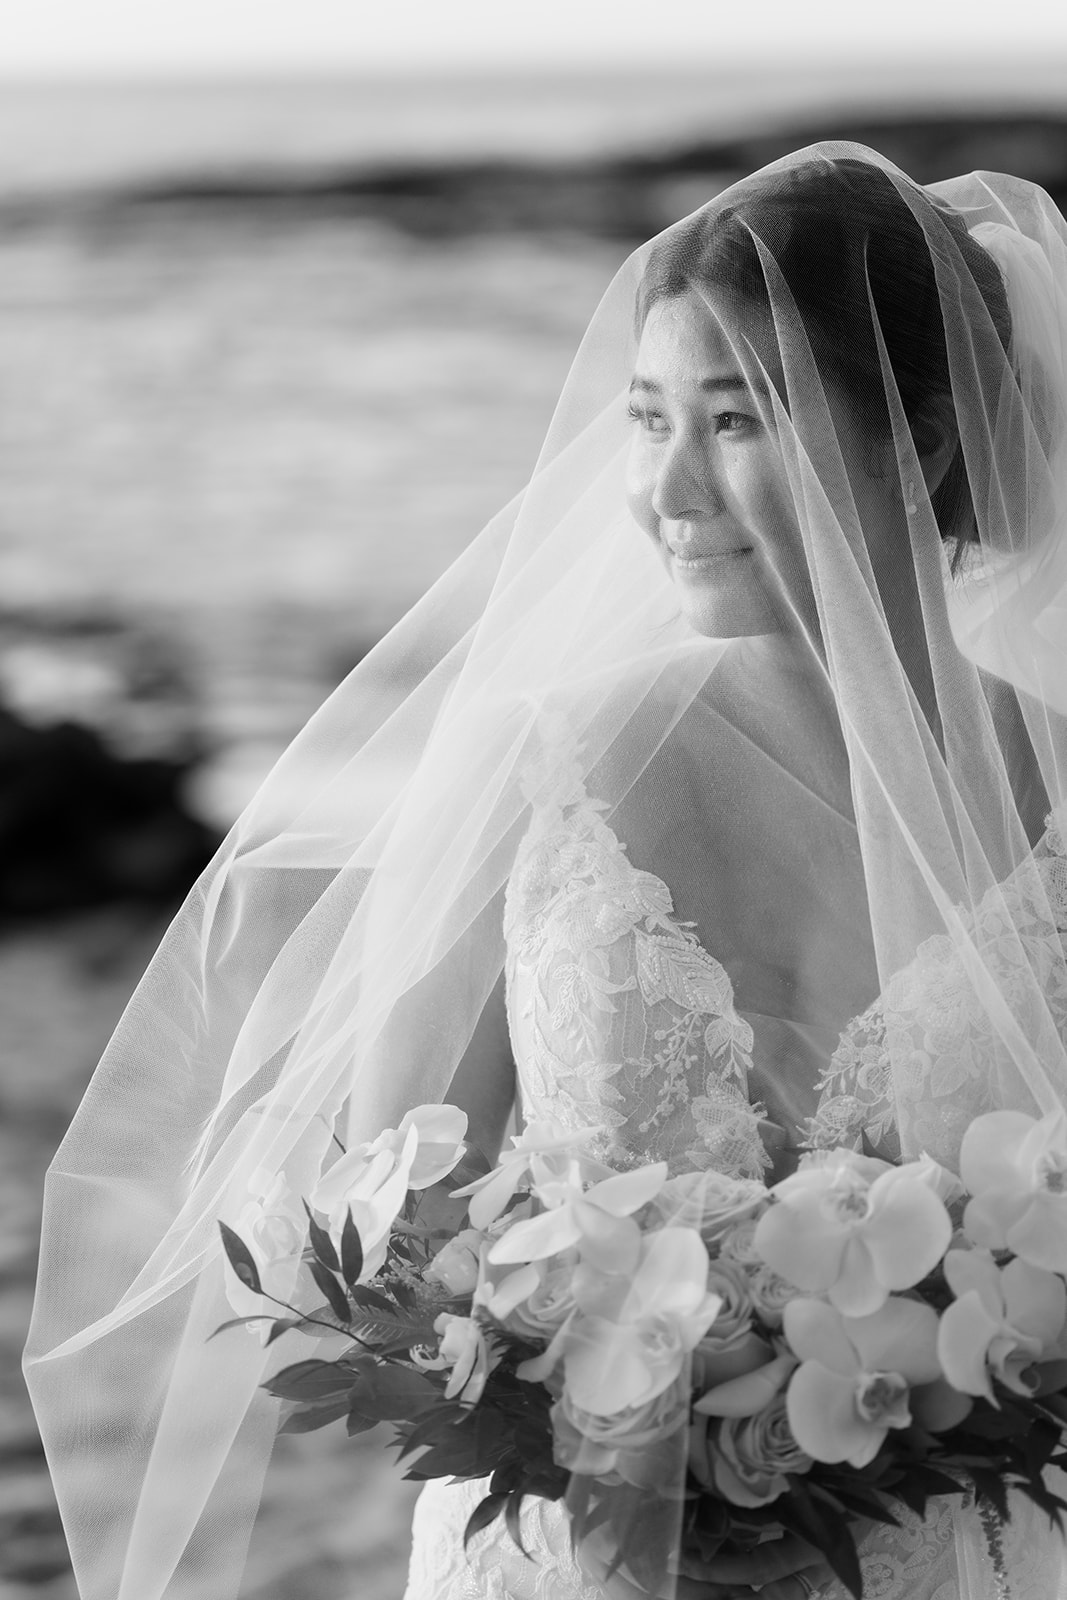 A monochrome photo of the bride wearing a wedding veil on the beach.